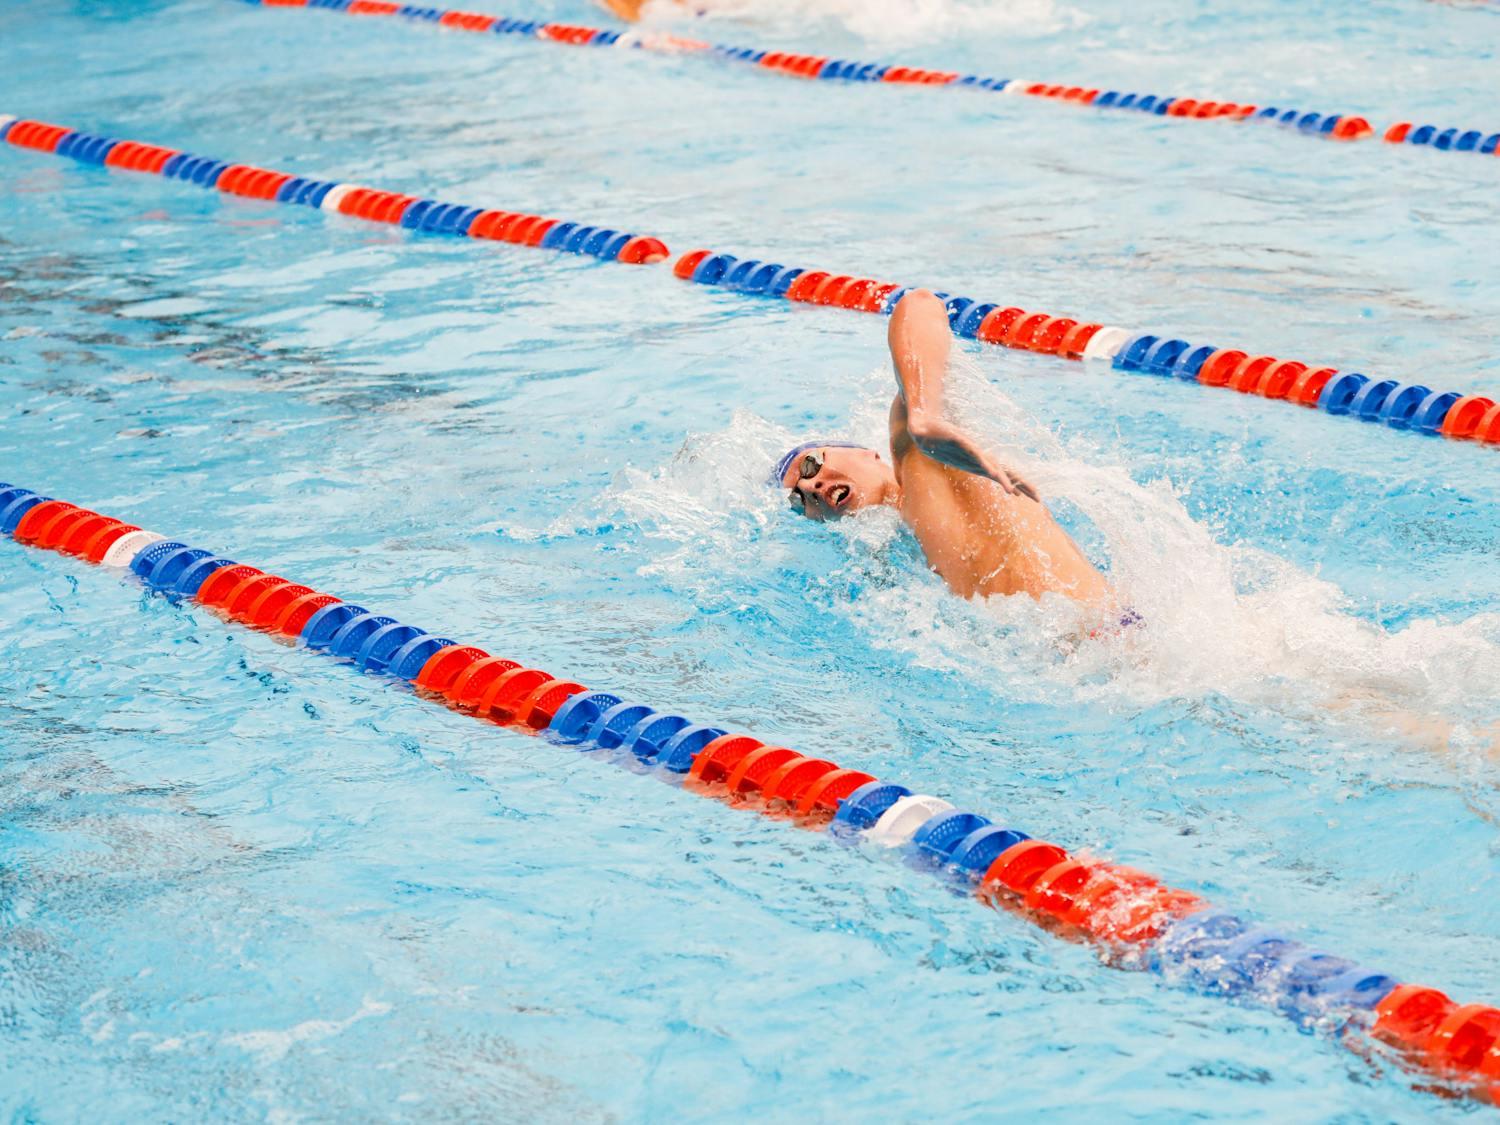 Florida's Oskar Lindholm competes in the 500 free during a meet against Georgia on Oct. 29.